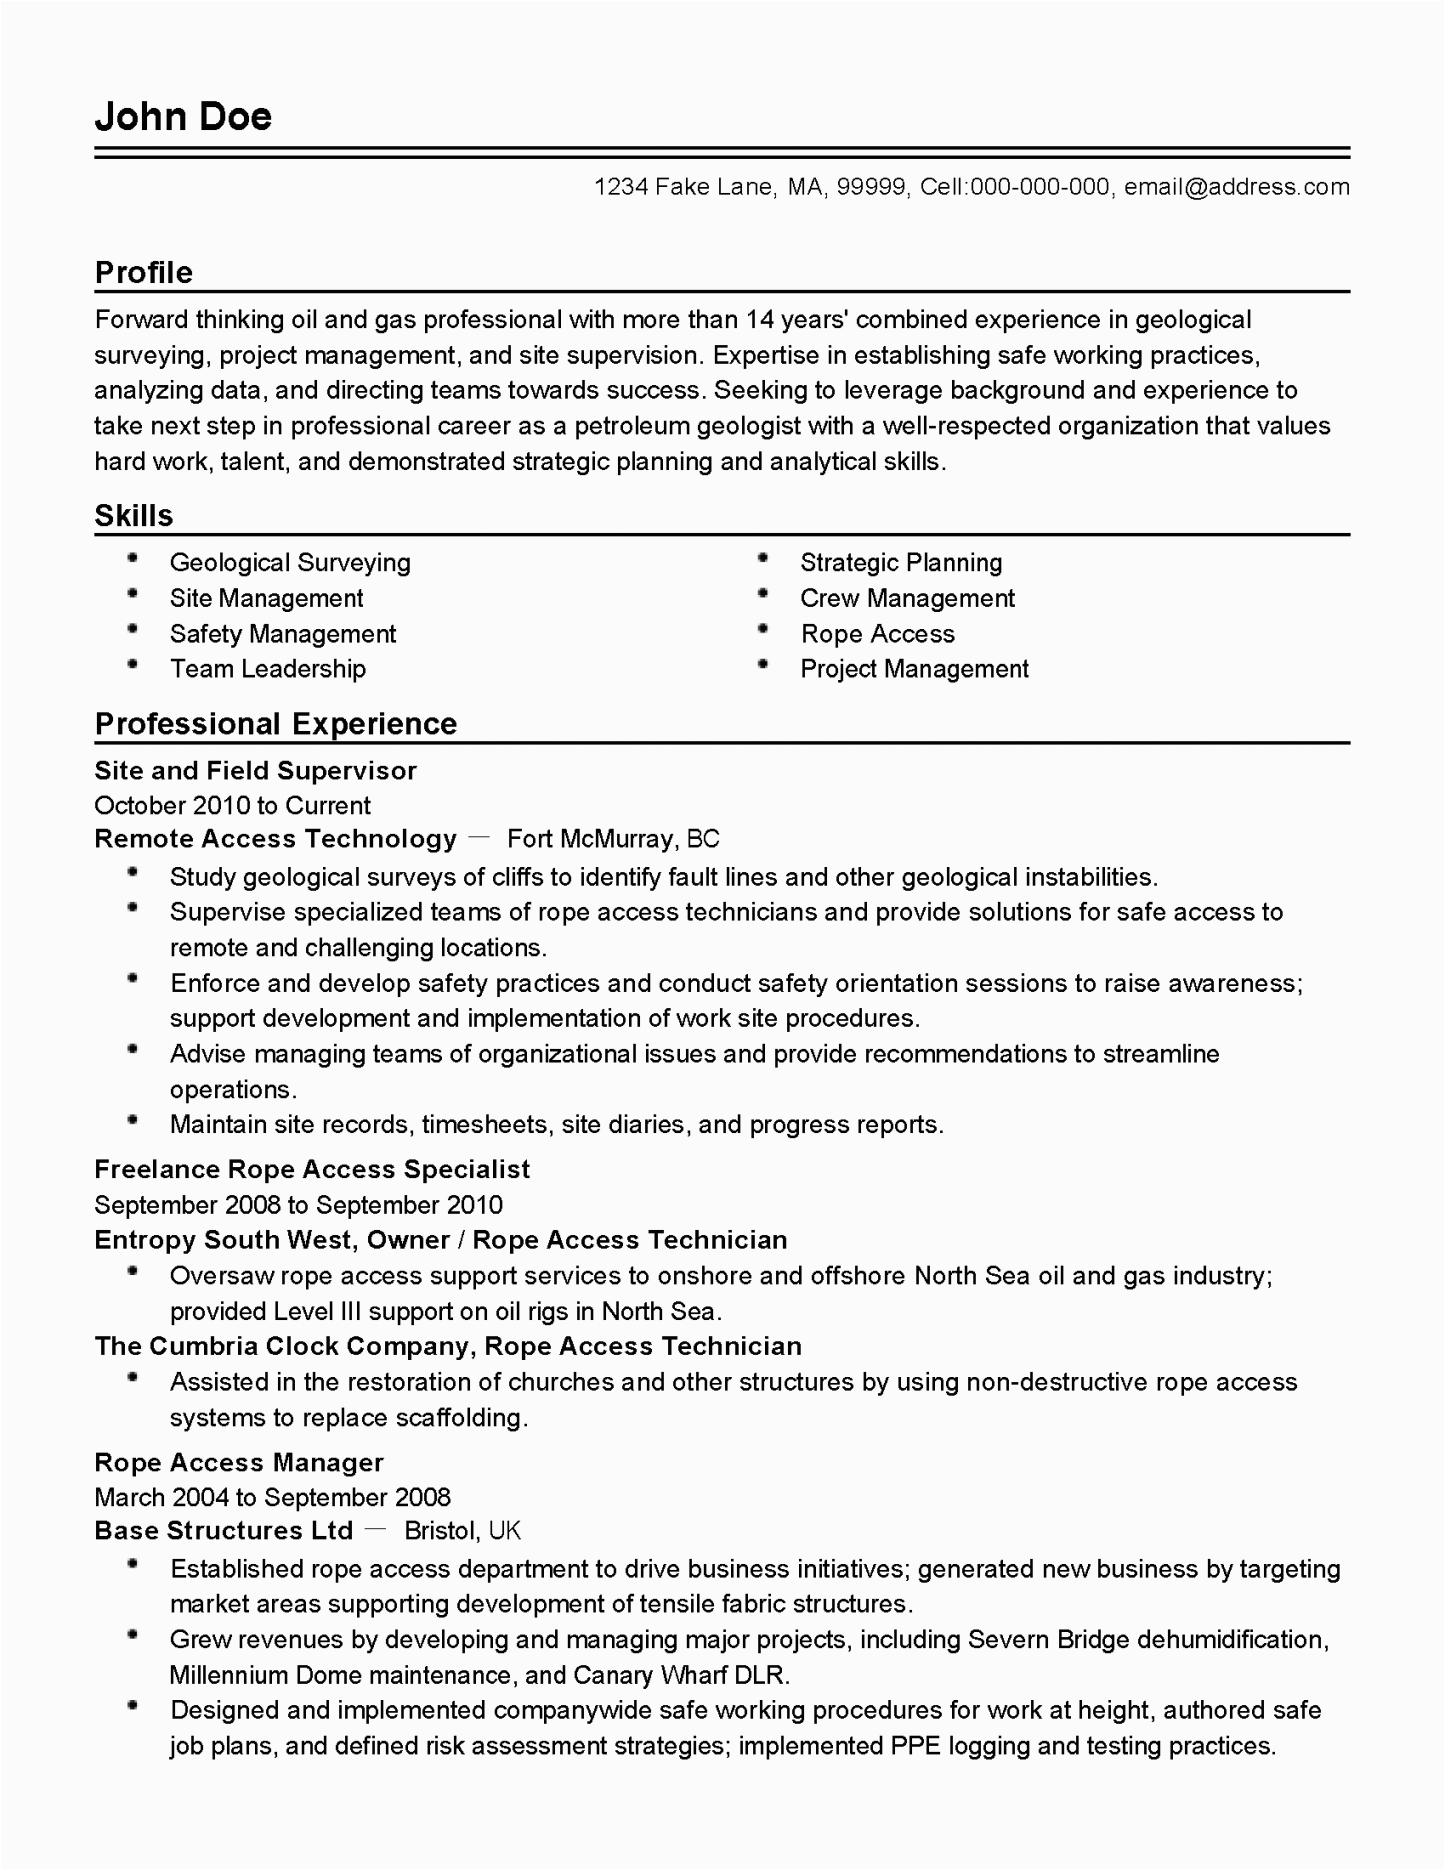 Sample Resume format for Oil and Gas Industry Oil and Gas Resume Examples